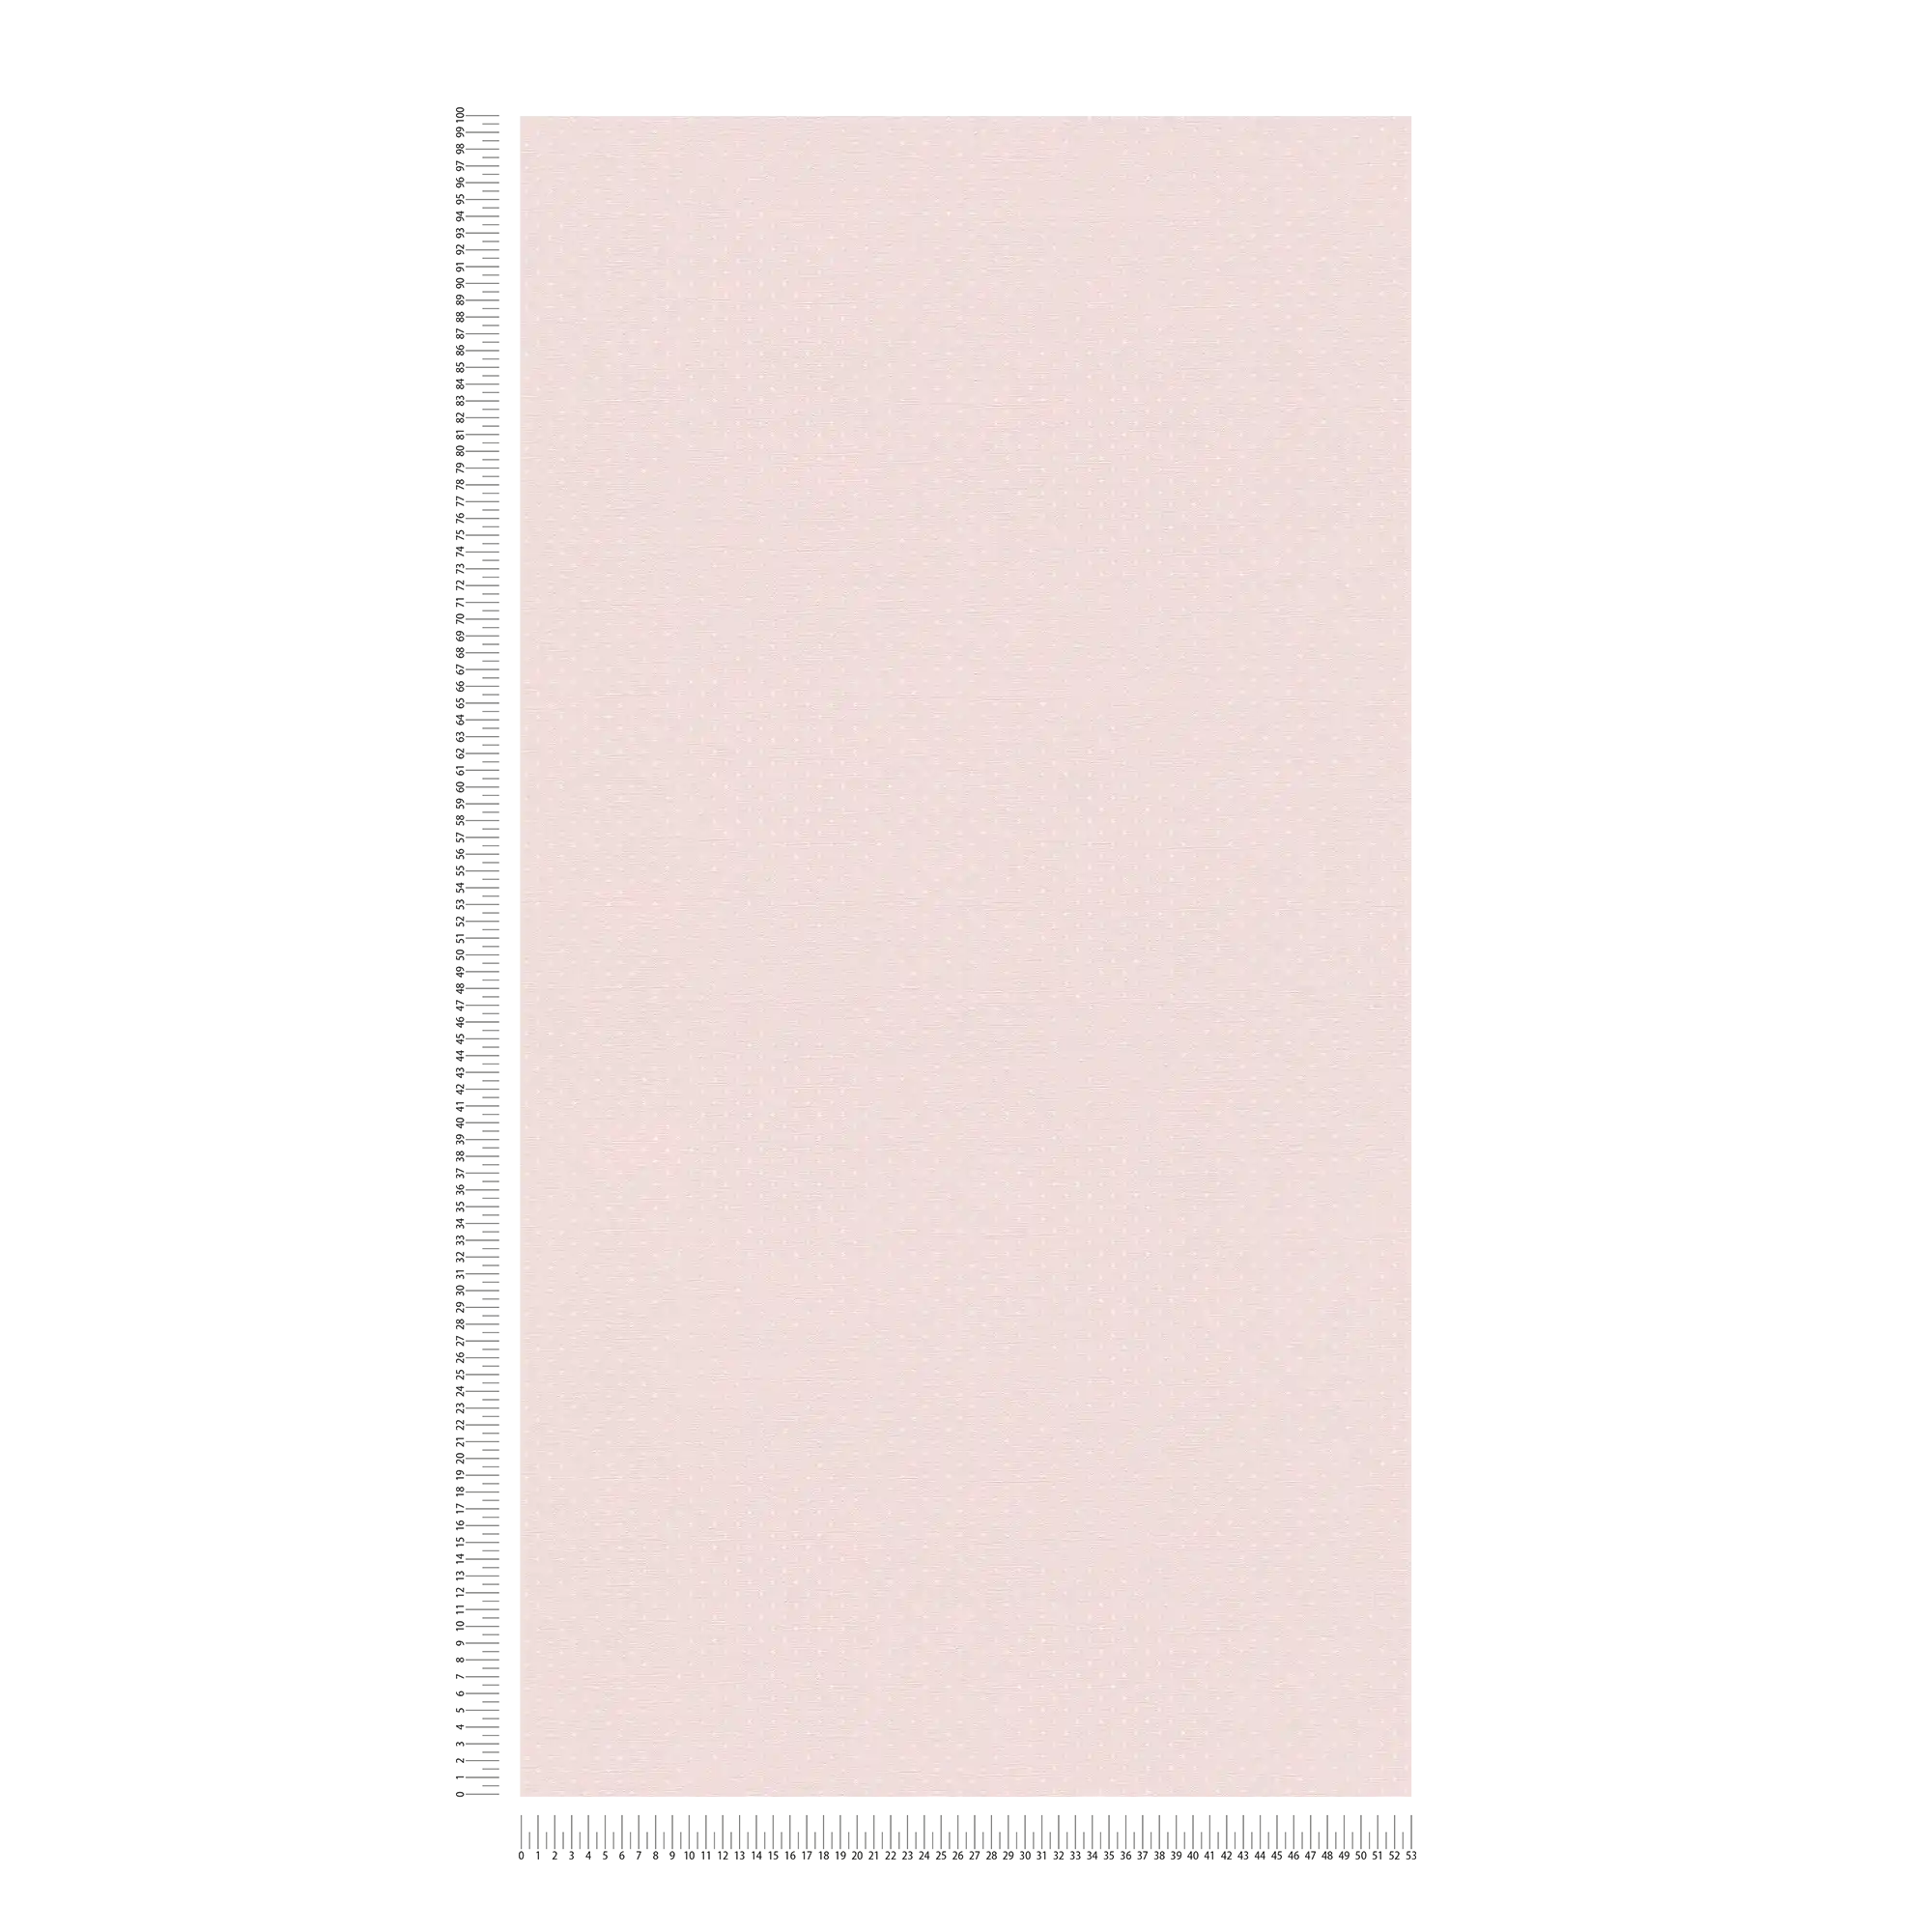             Country style wallpaper with small dots - pink, white
        